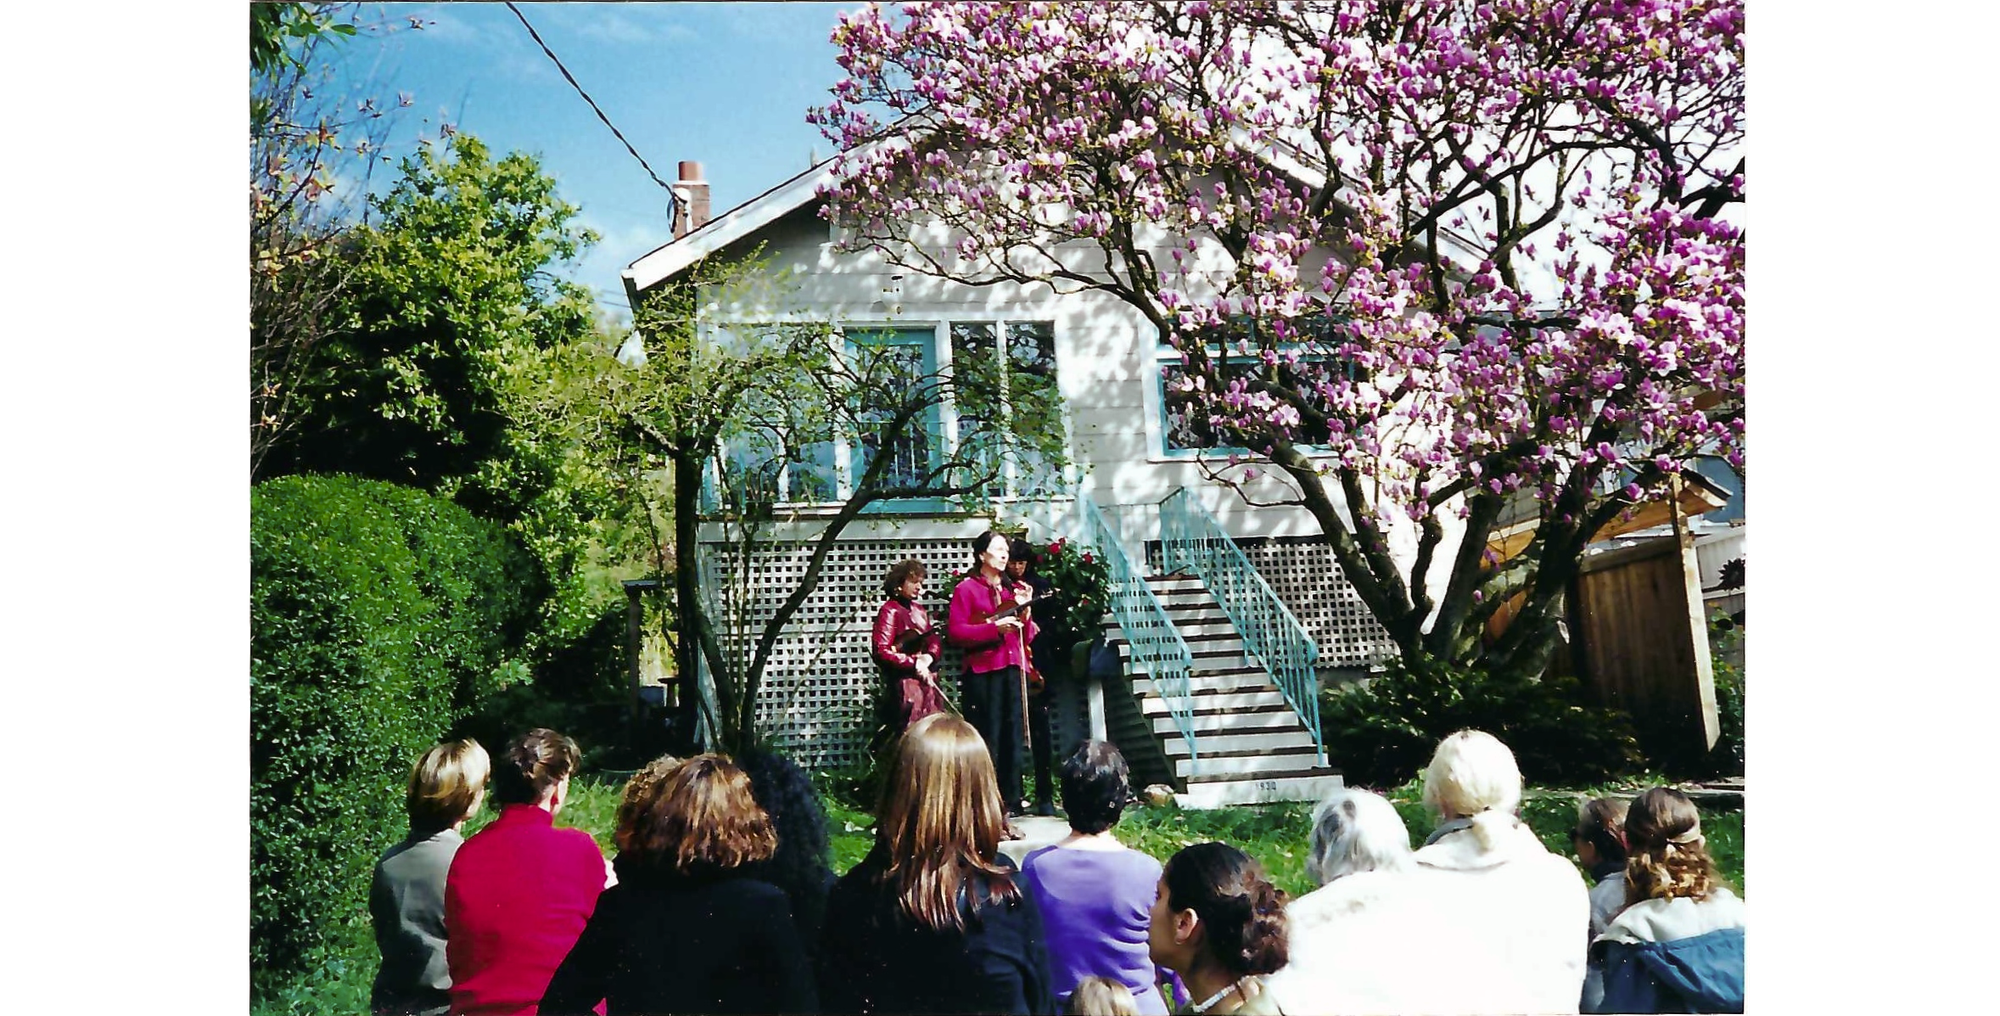 Photo of two women wit violins stand in front of house with magnolia in bloom, with group of women in the foreground